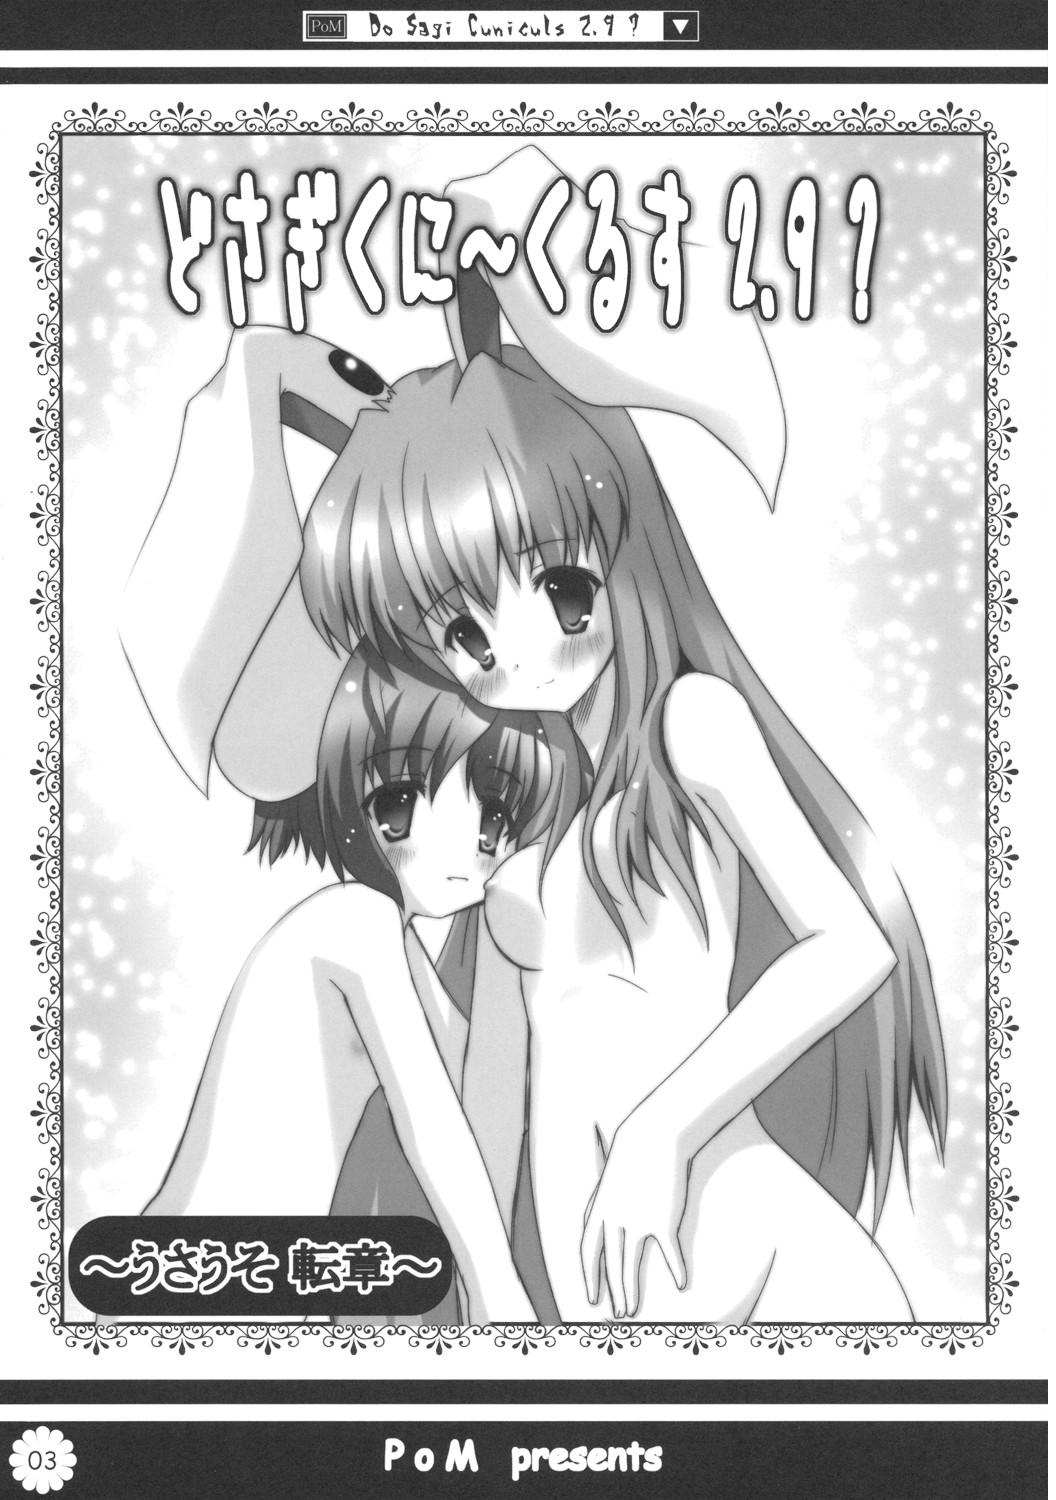 Teensex Do Sagi Cuniculs 2.9? - Touhou project Ameteur Porn - Picture 2